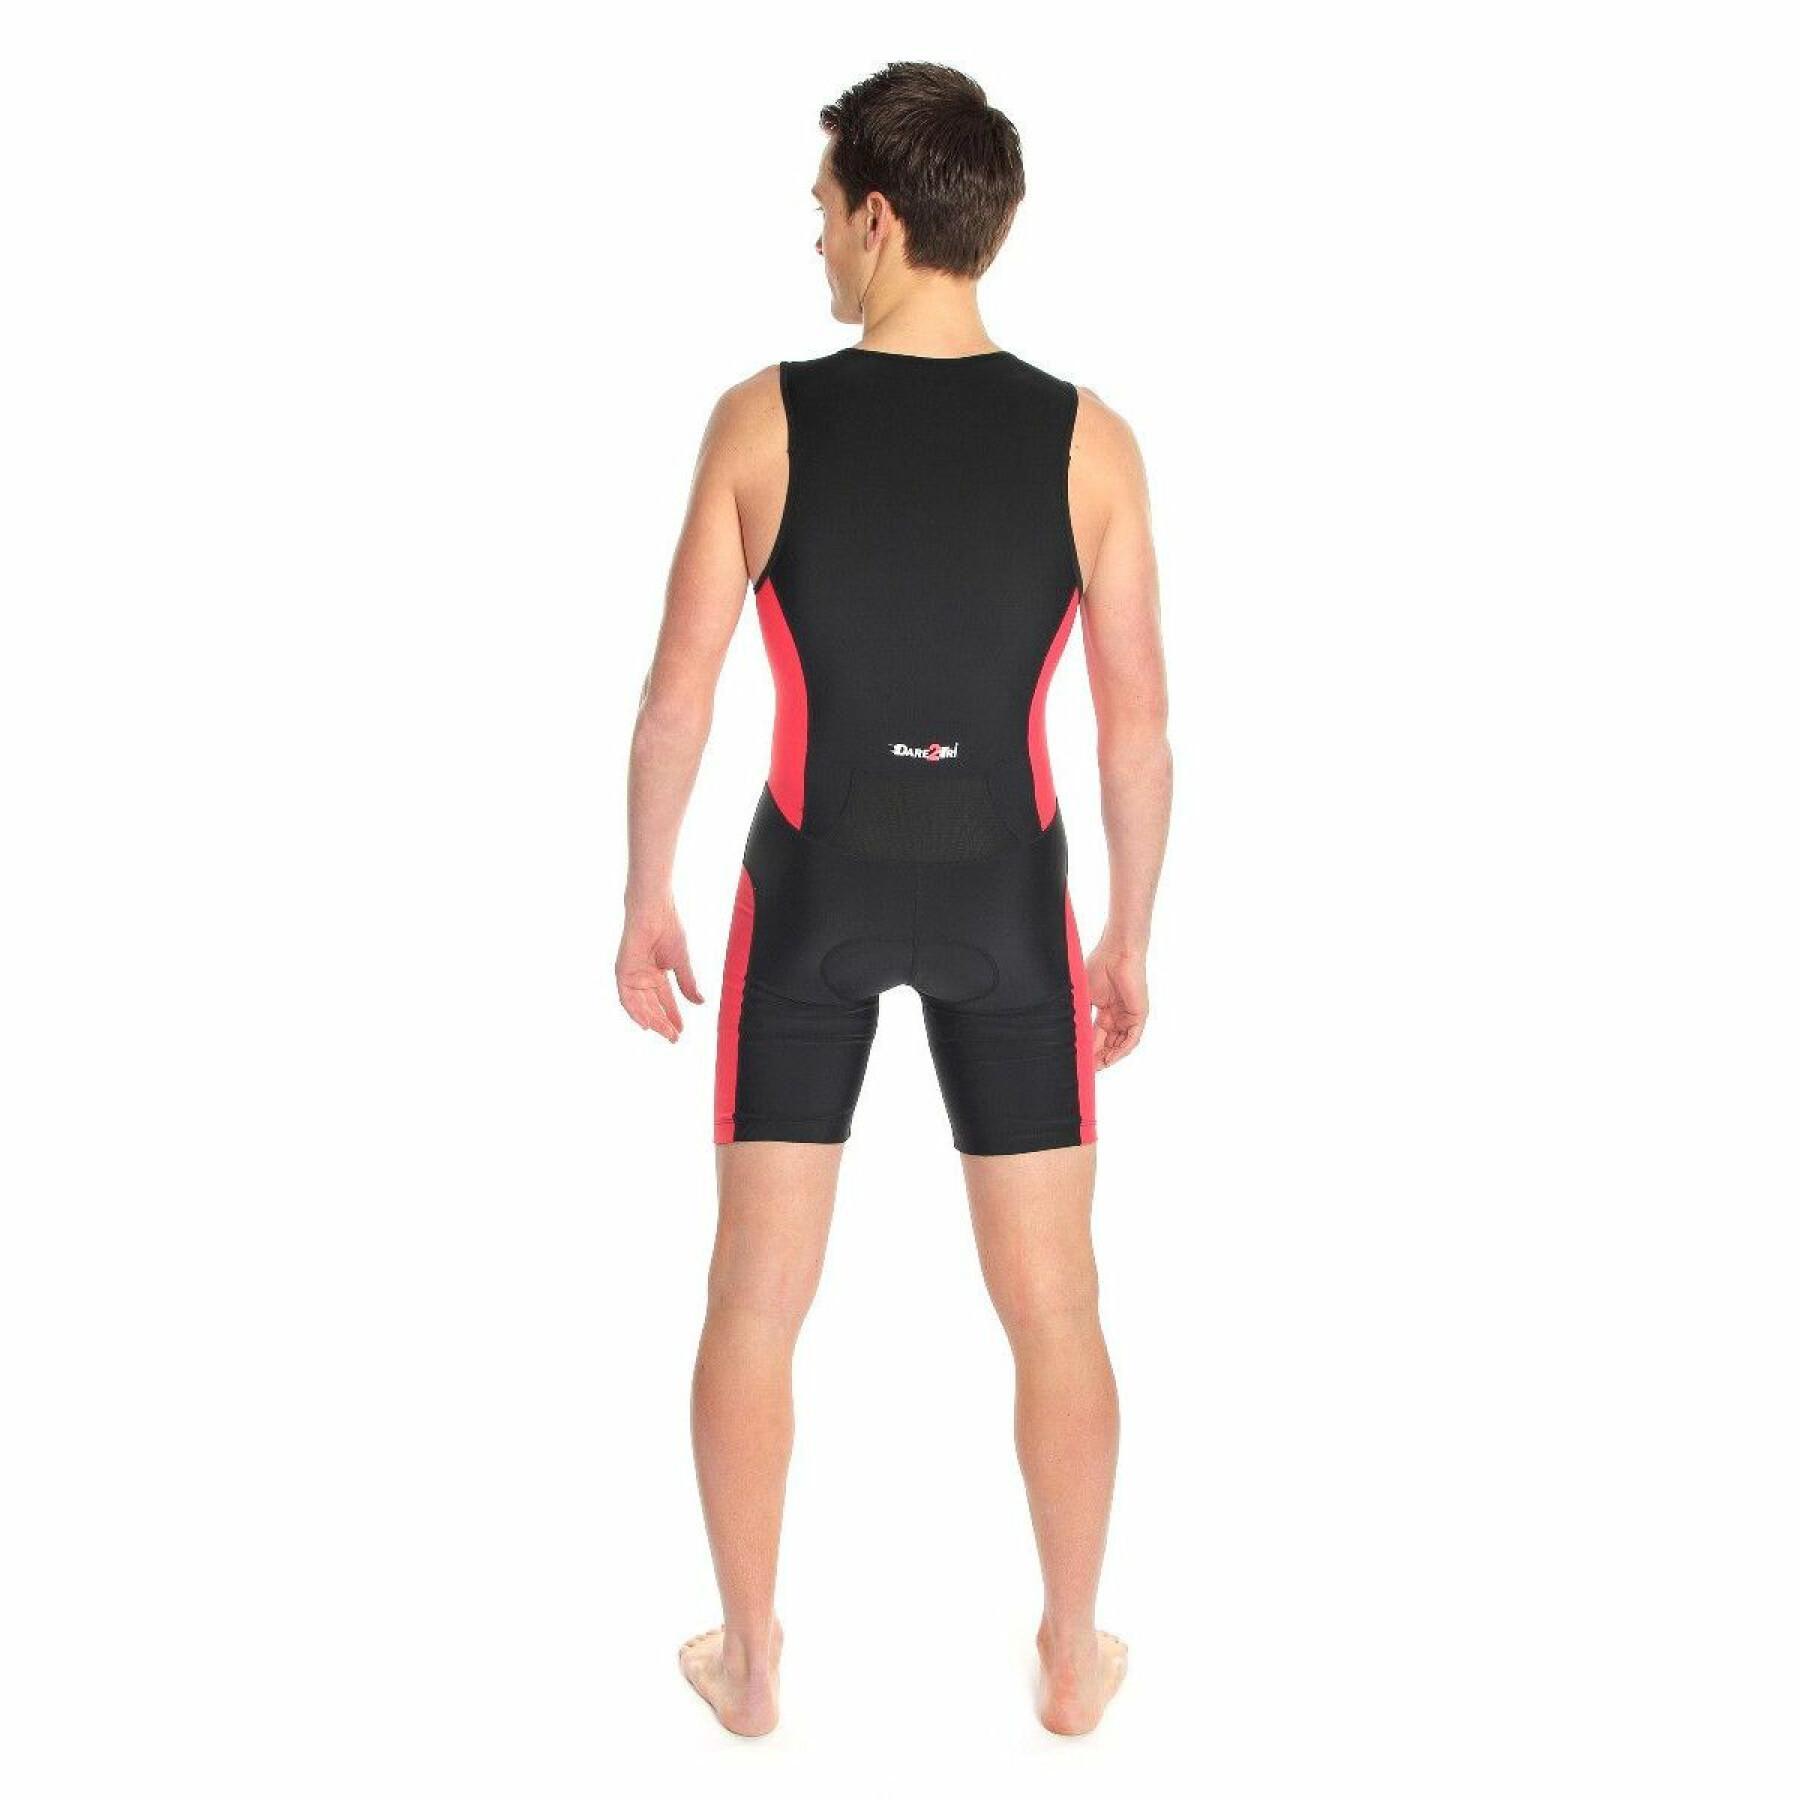 Surf shorty wetsuit Dare2tri